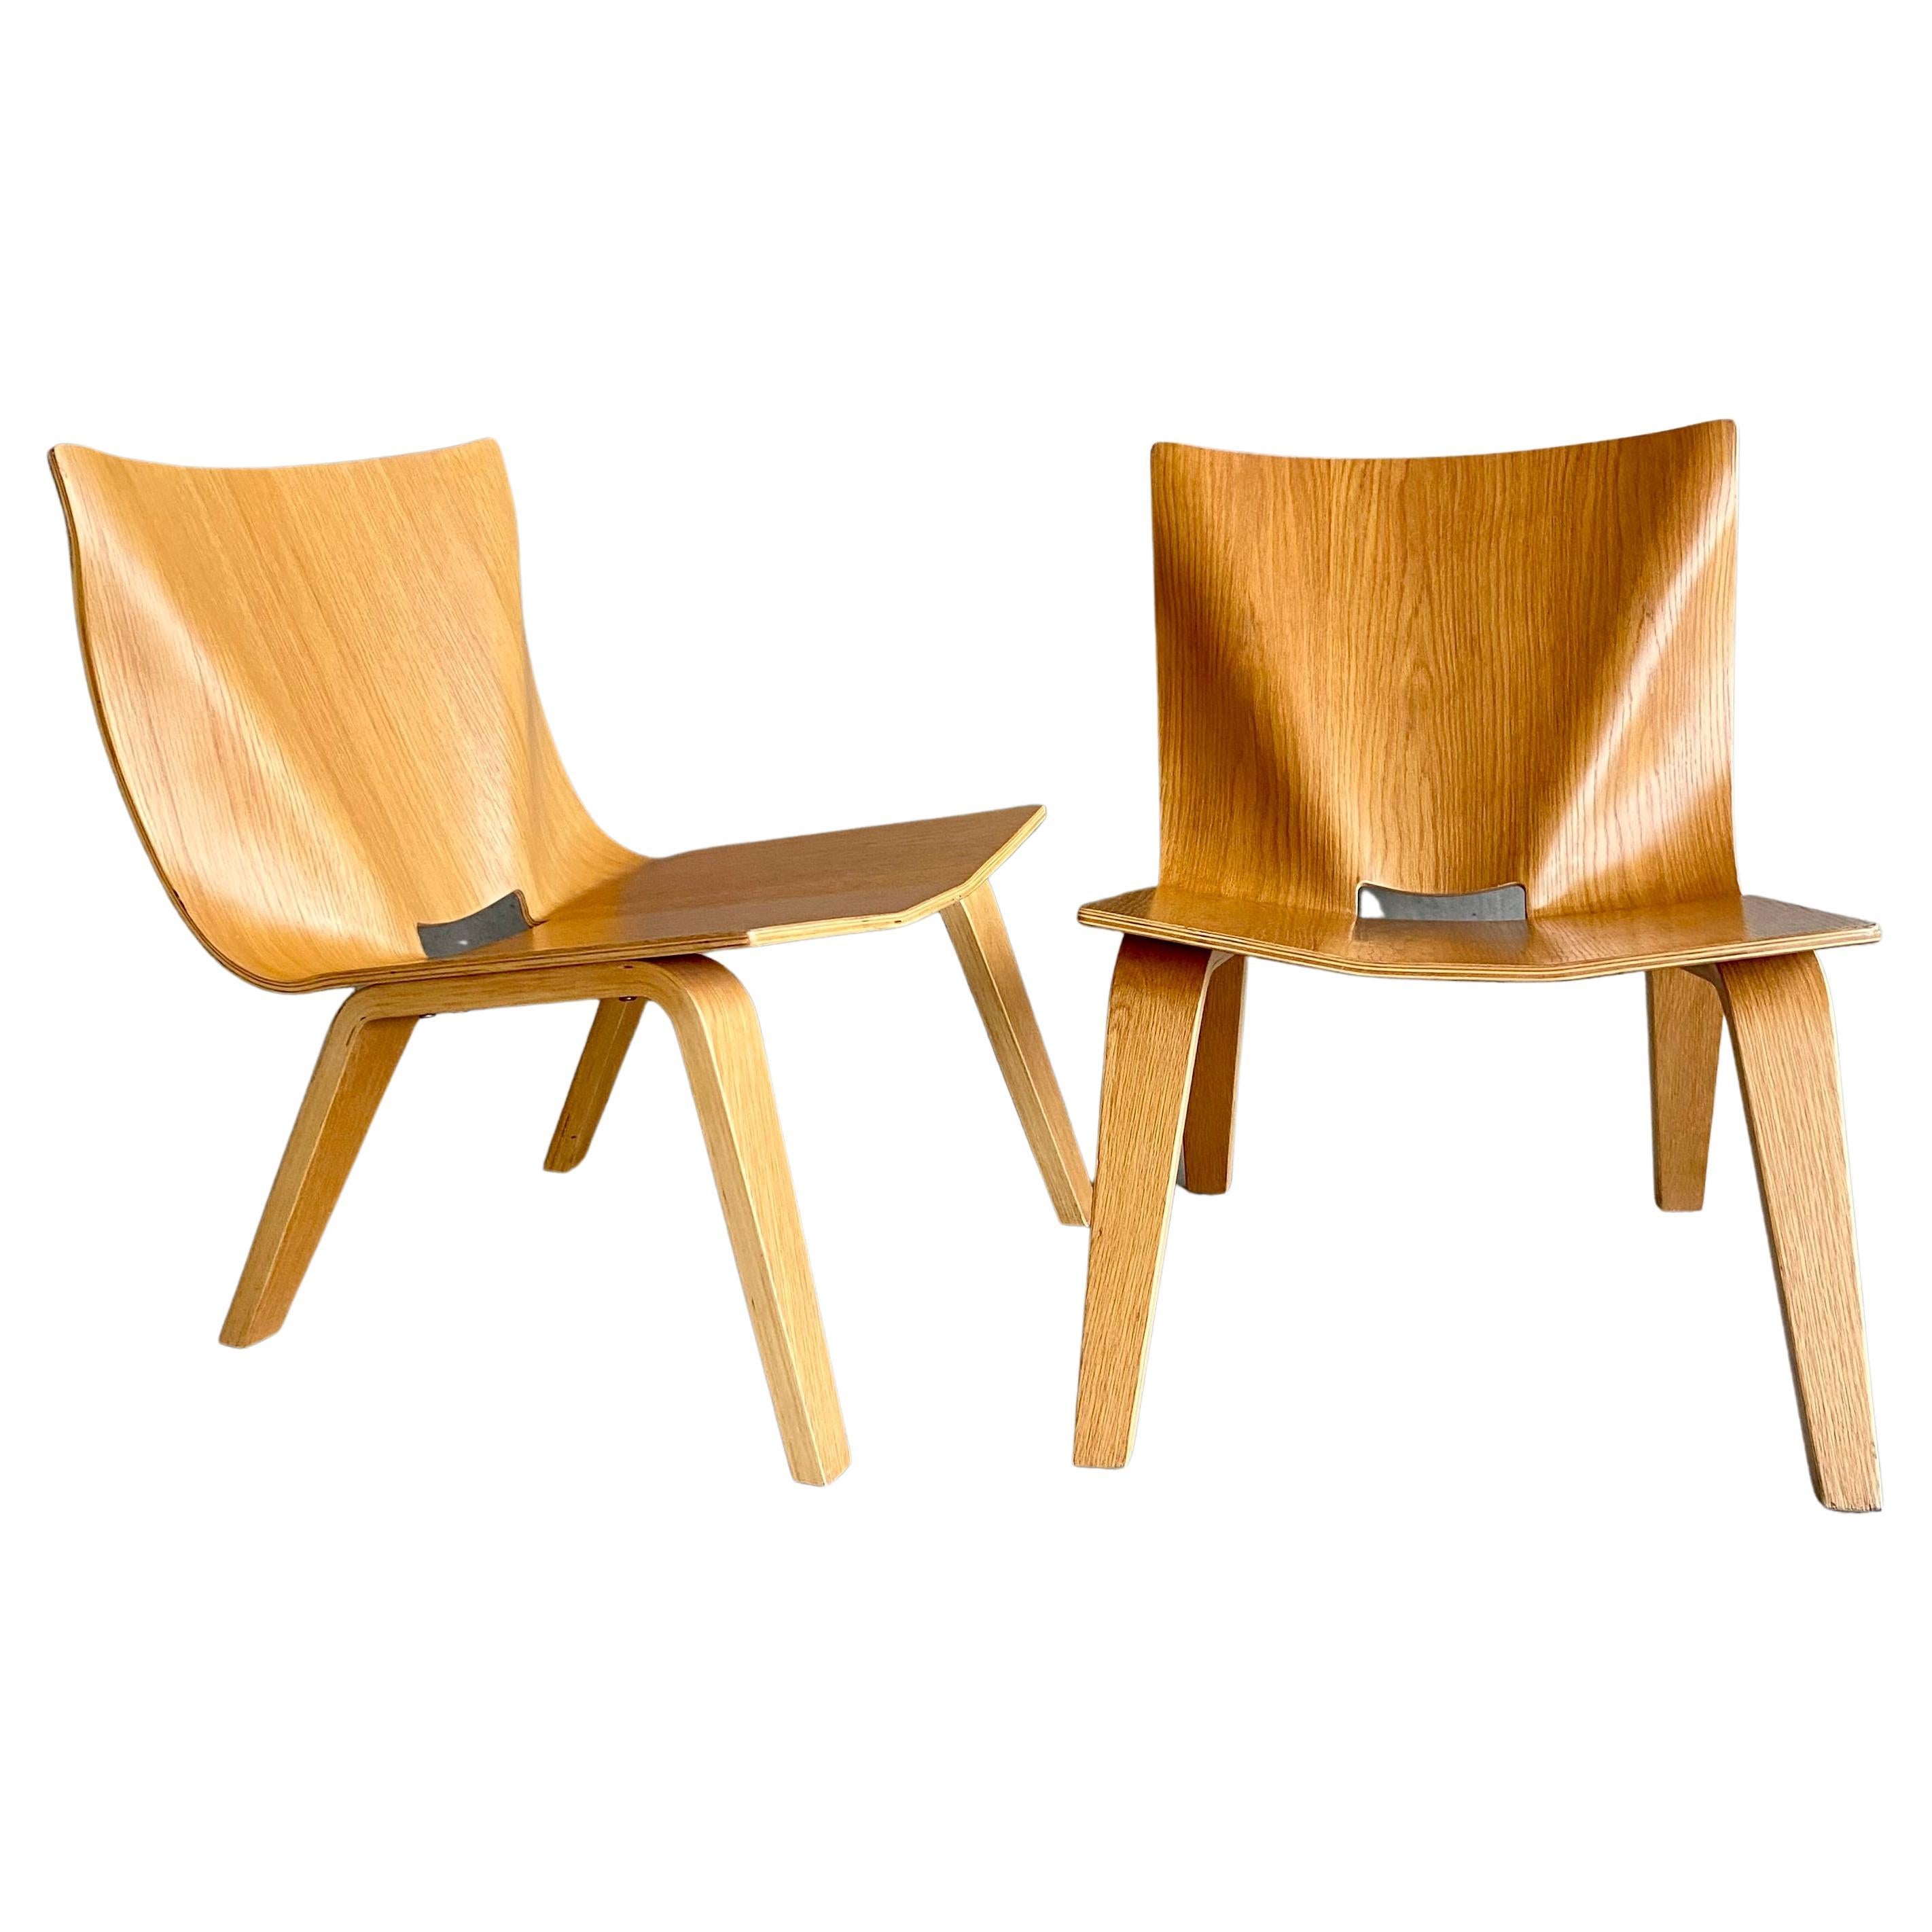 Introducing the exquisite pair of oak finered plywood low easy chairs, a perfect blend of style, comfort, and craftsmanship. These chairs are well-crafted with beautiful, well-thought folding lines on the seat as well as on the backrest. They are